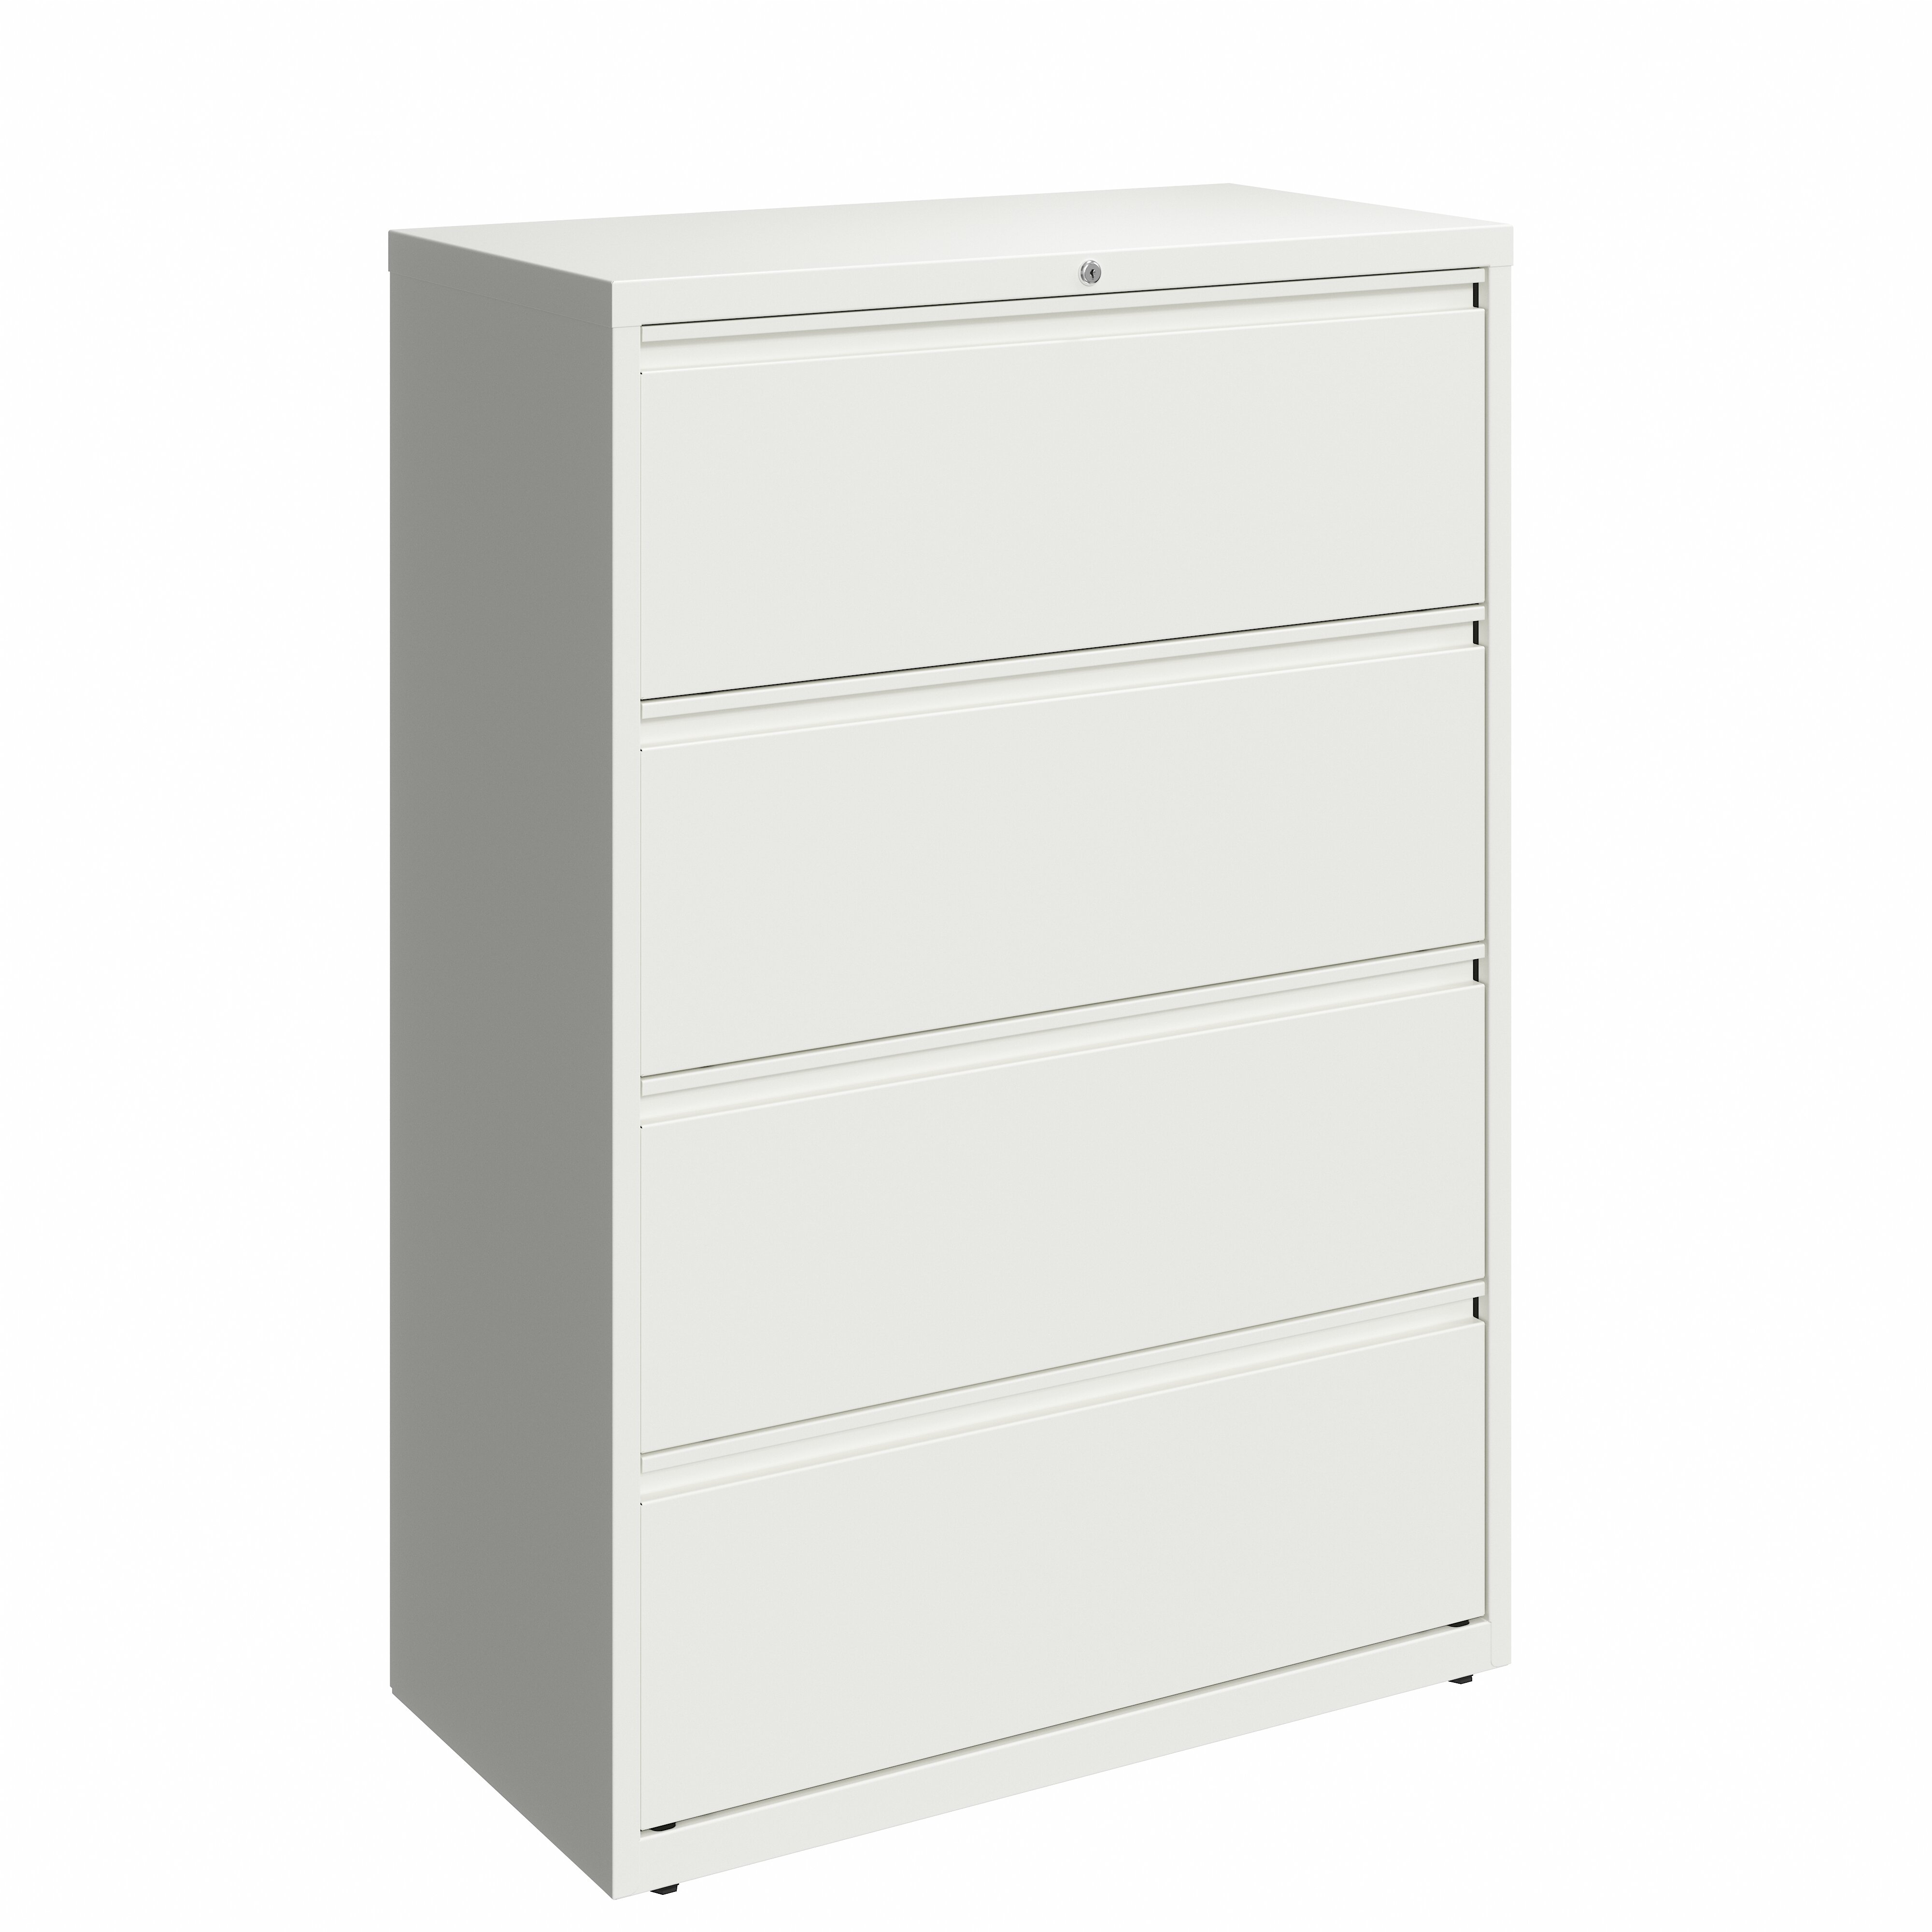 Harietta 4 Drawer Lateral Filing Cabinet Reviews